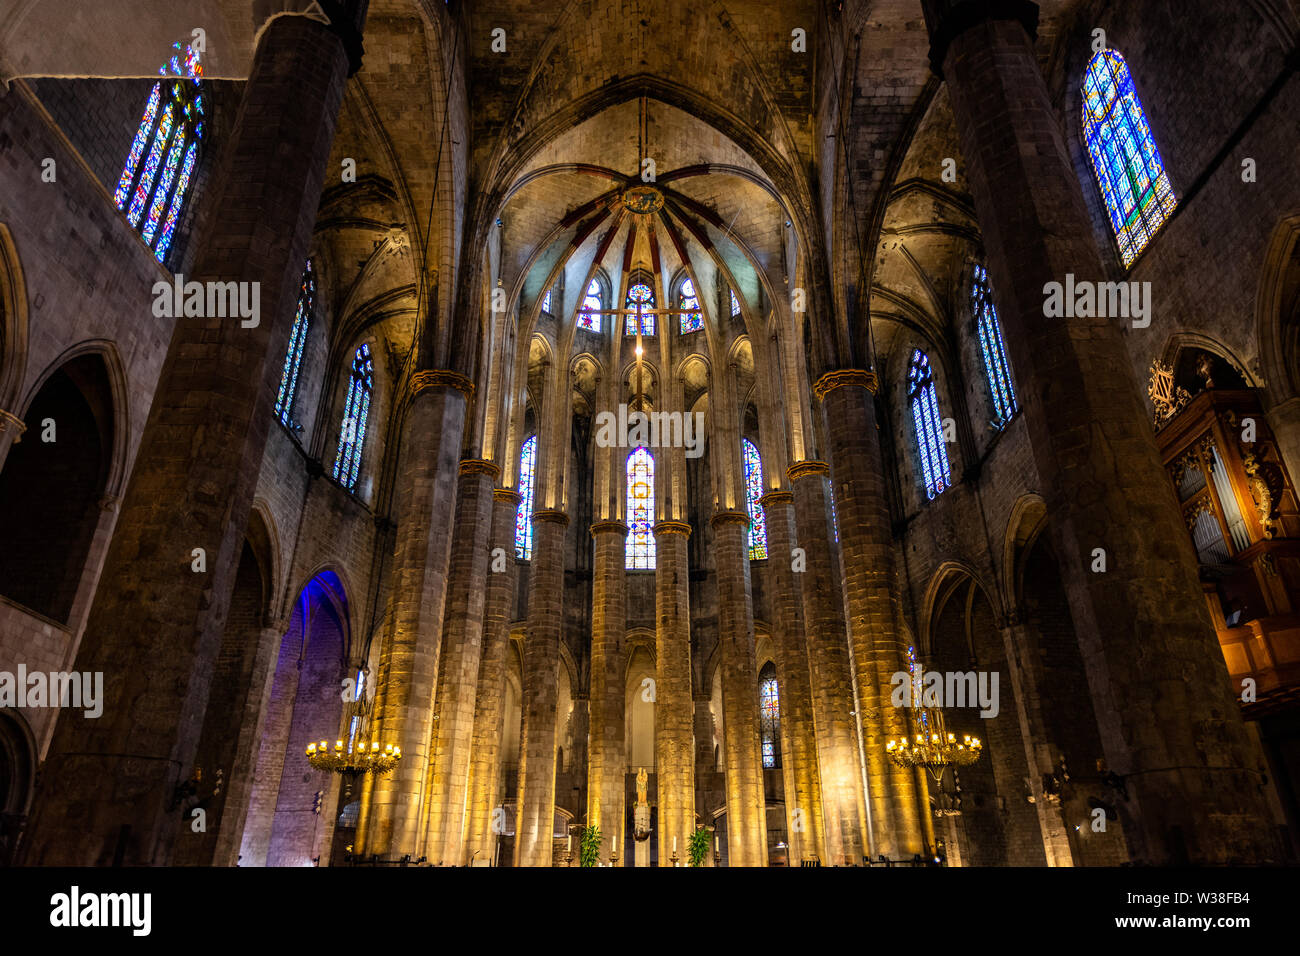 Interior of Santa Maria del Mar Basilica in typical Catalan Gothic style with pointed arches, high columns and colourful windows. La Ribera, Barcelona Stock Photo